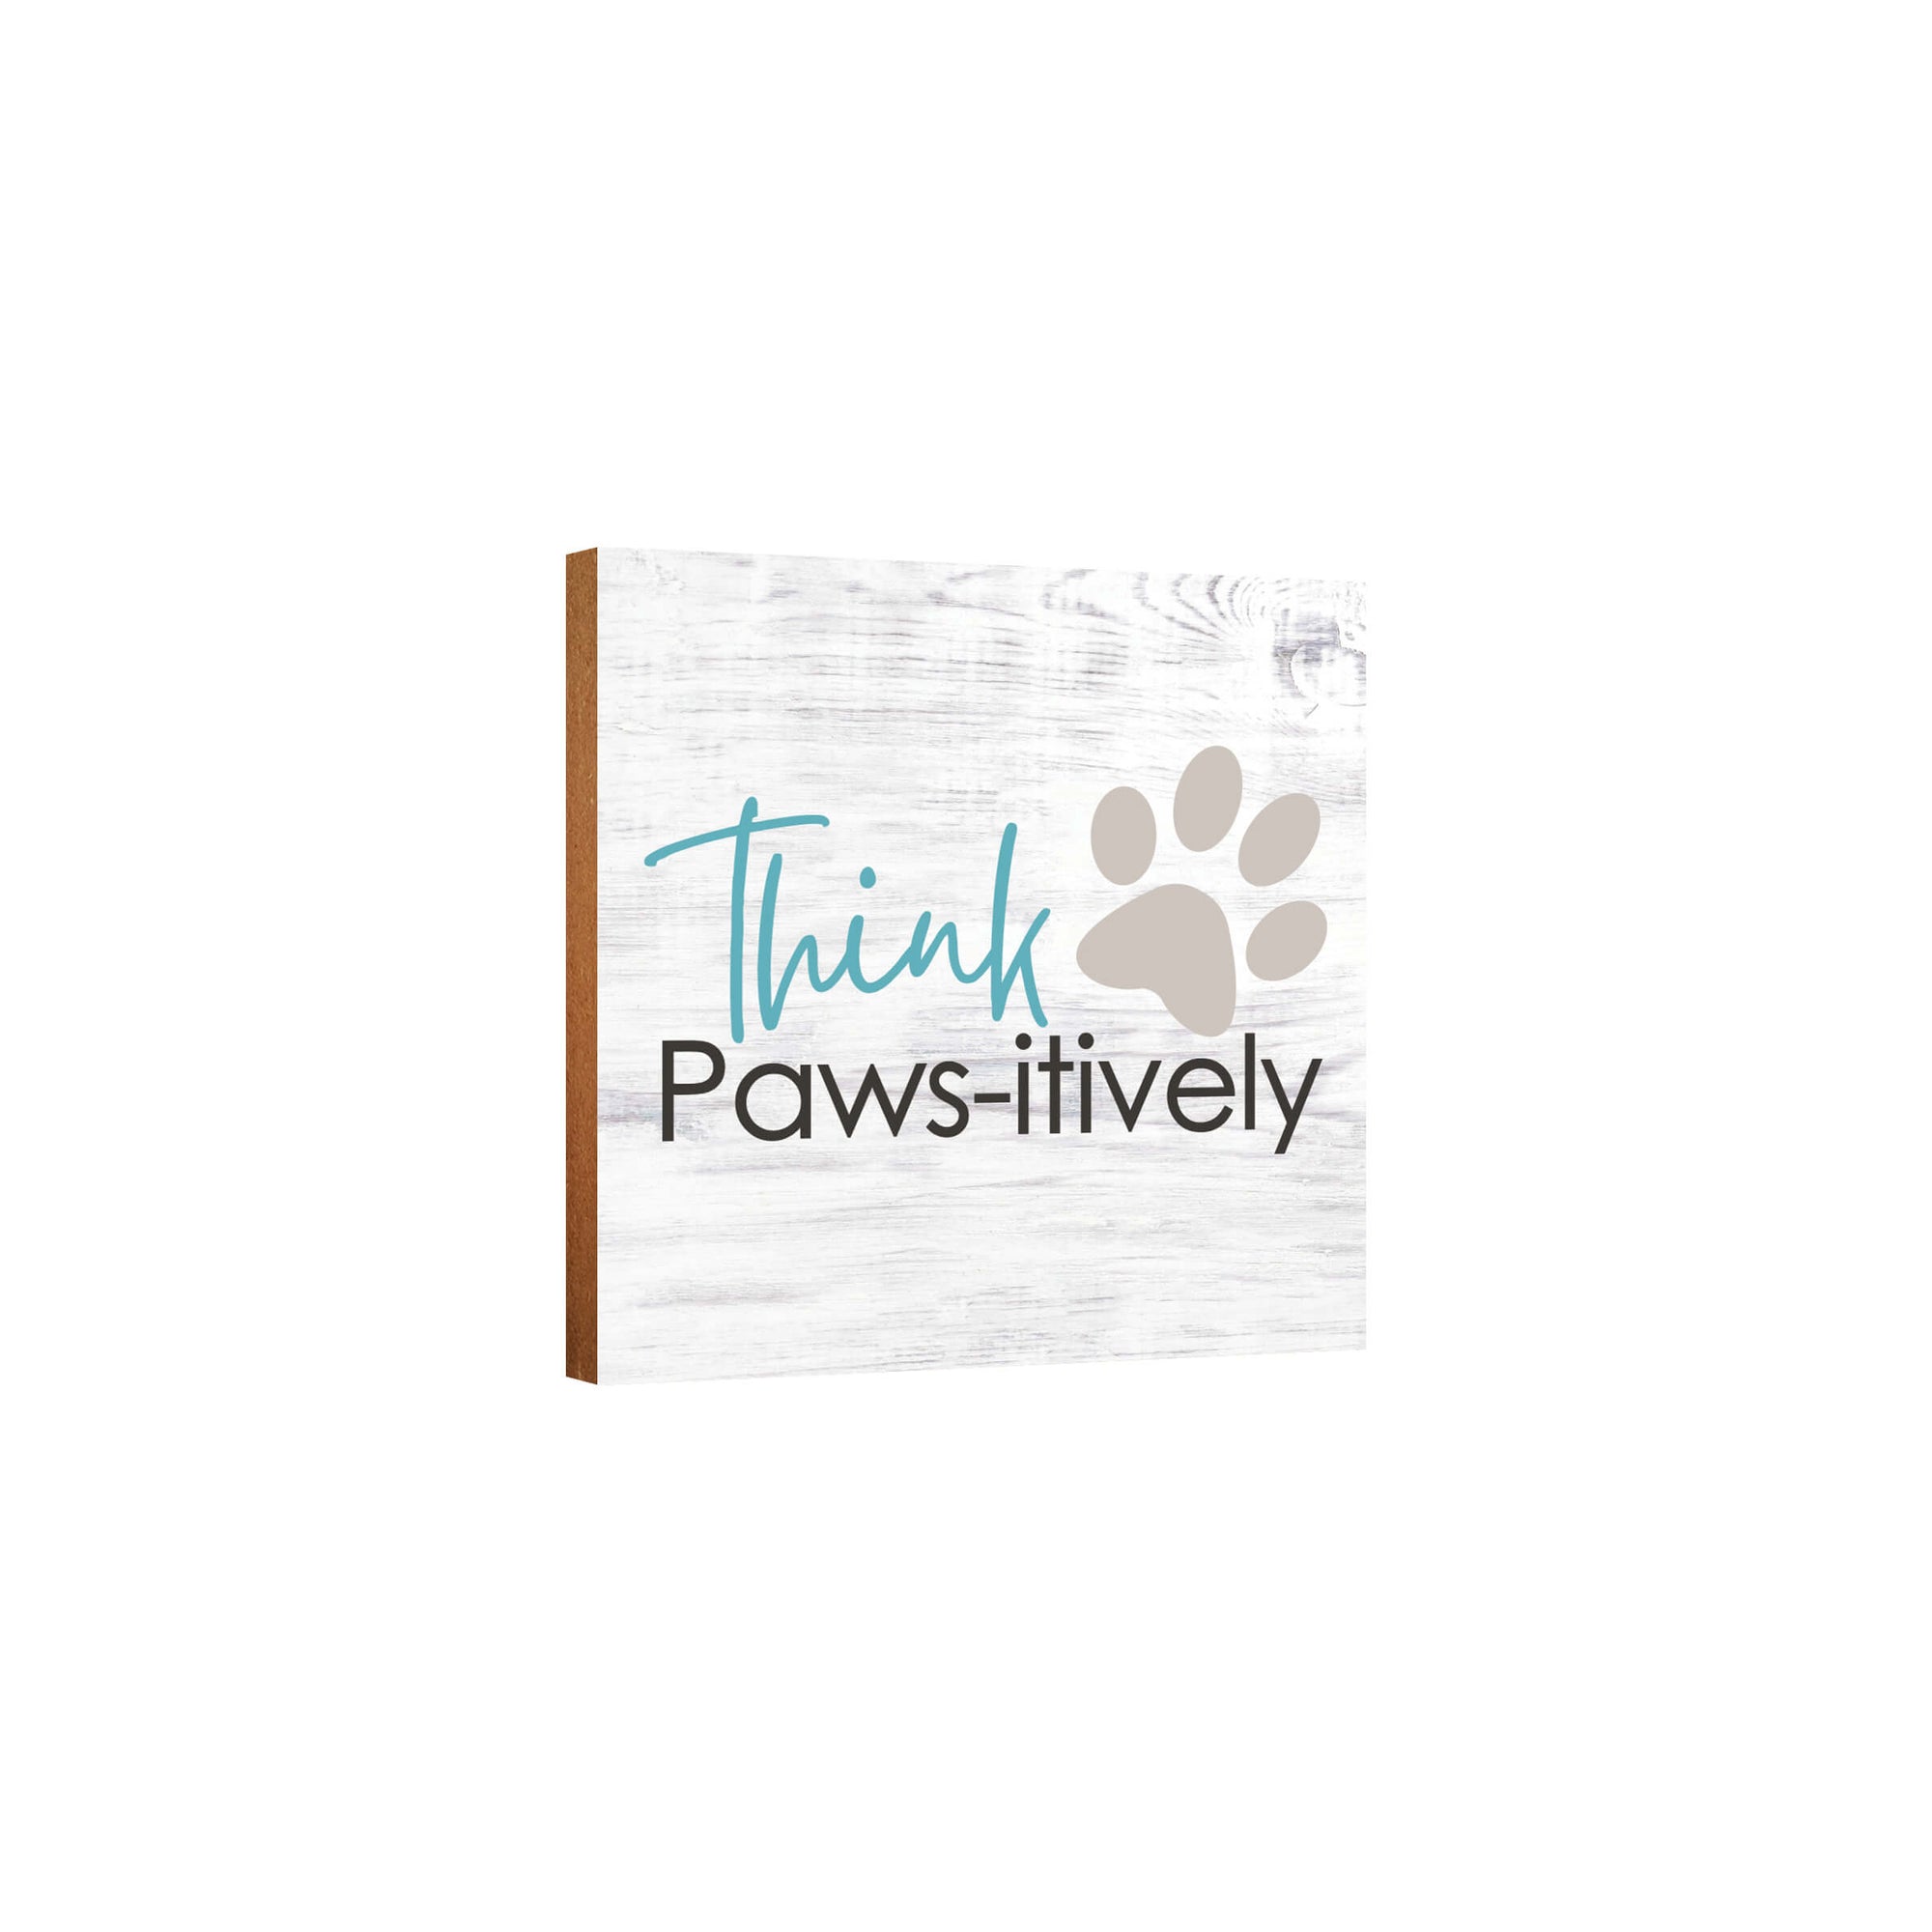 Wooden Shelf Decor and Tabletop Signs with Pet Verses - Think Paws-itively